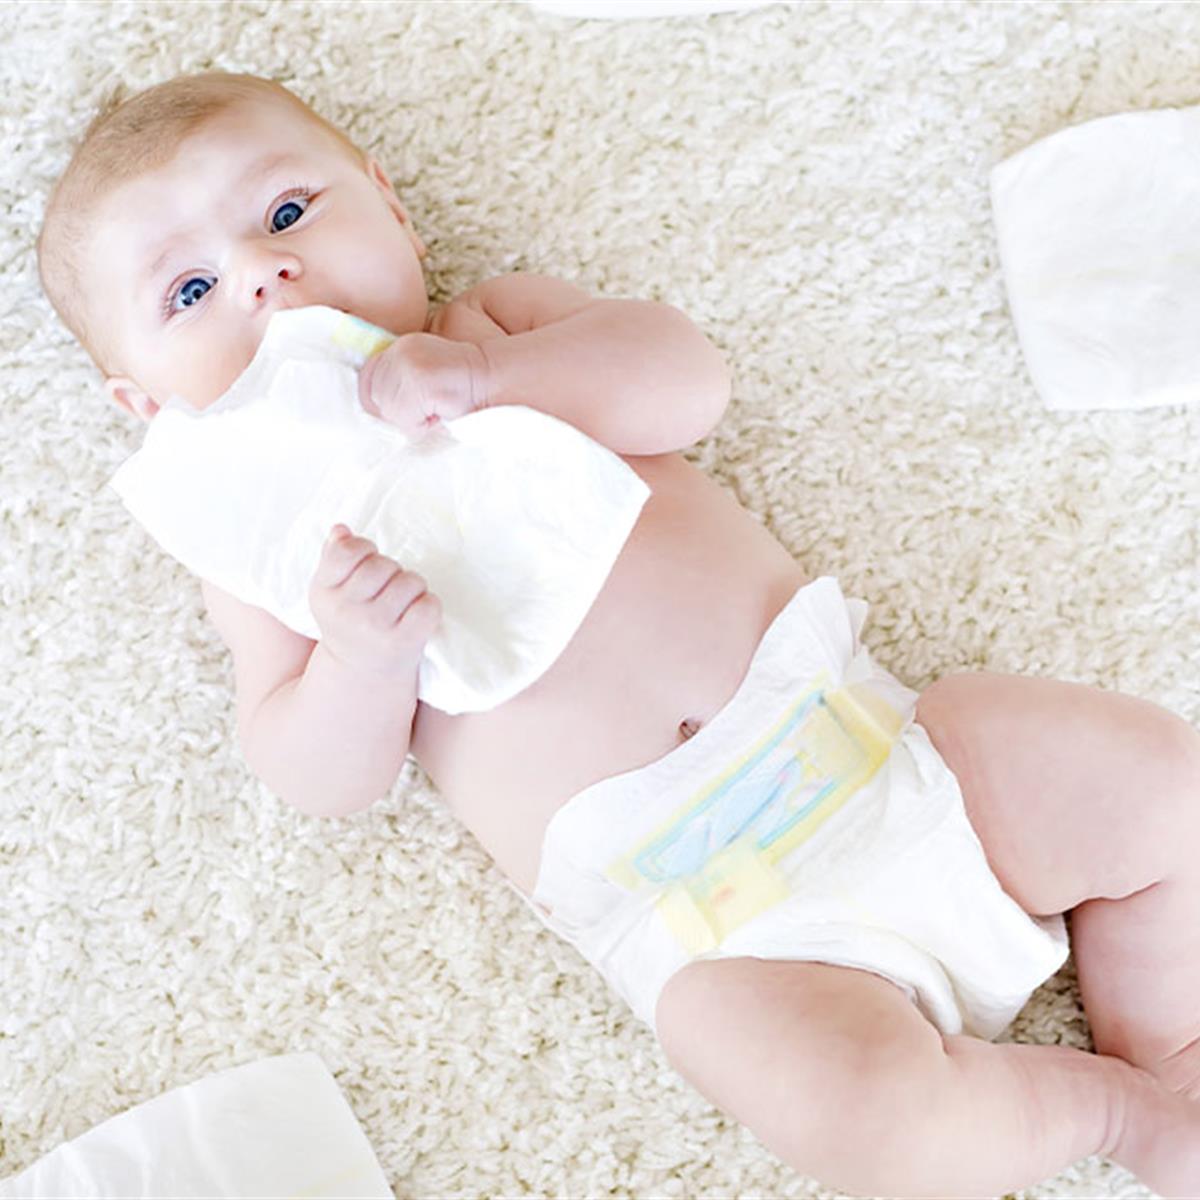 How To Tell If Your Breastfed Baby Is Getting Enough Milk Healthychildren Org